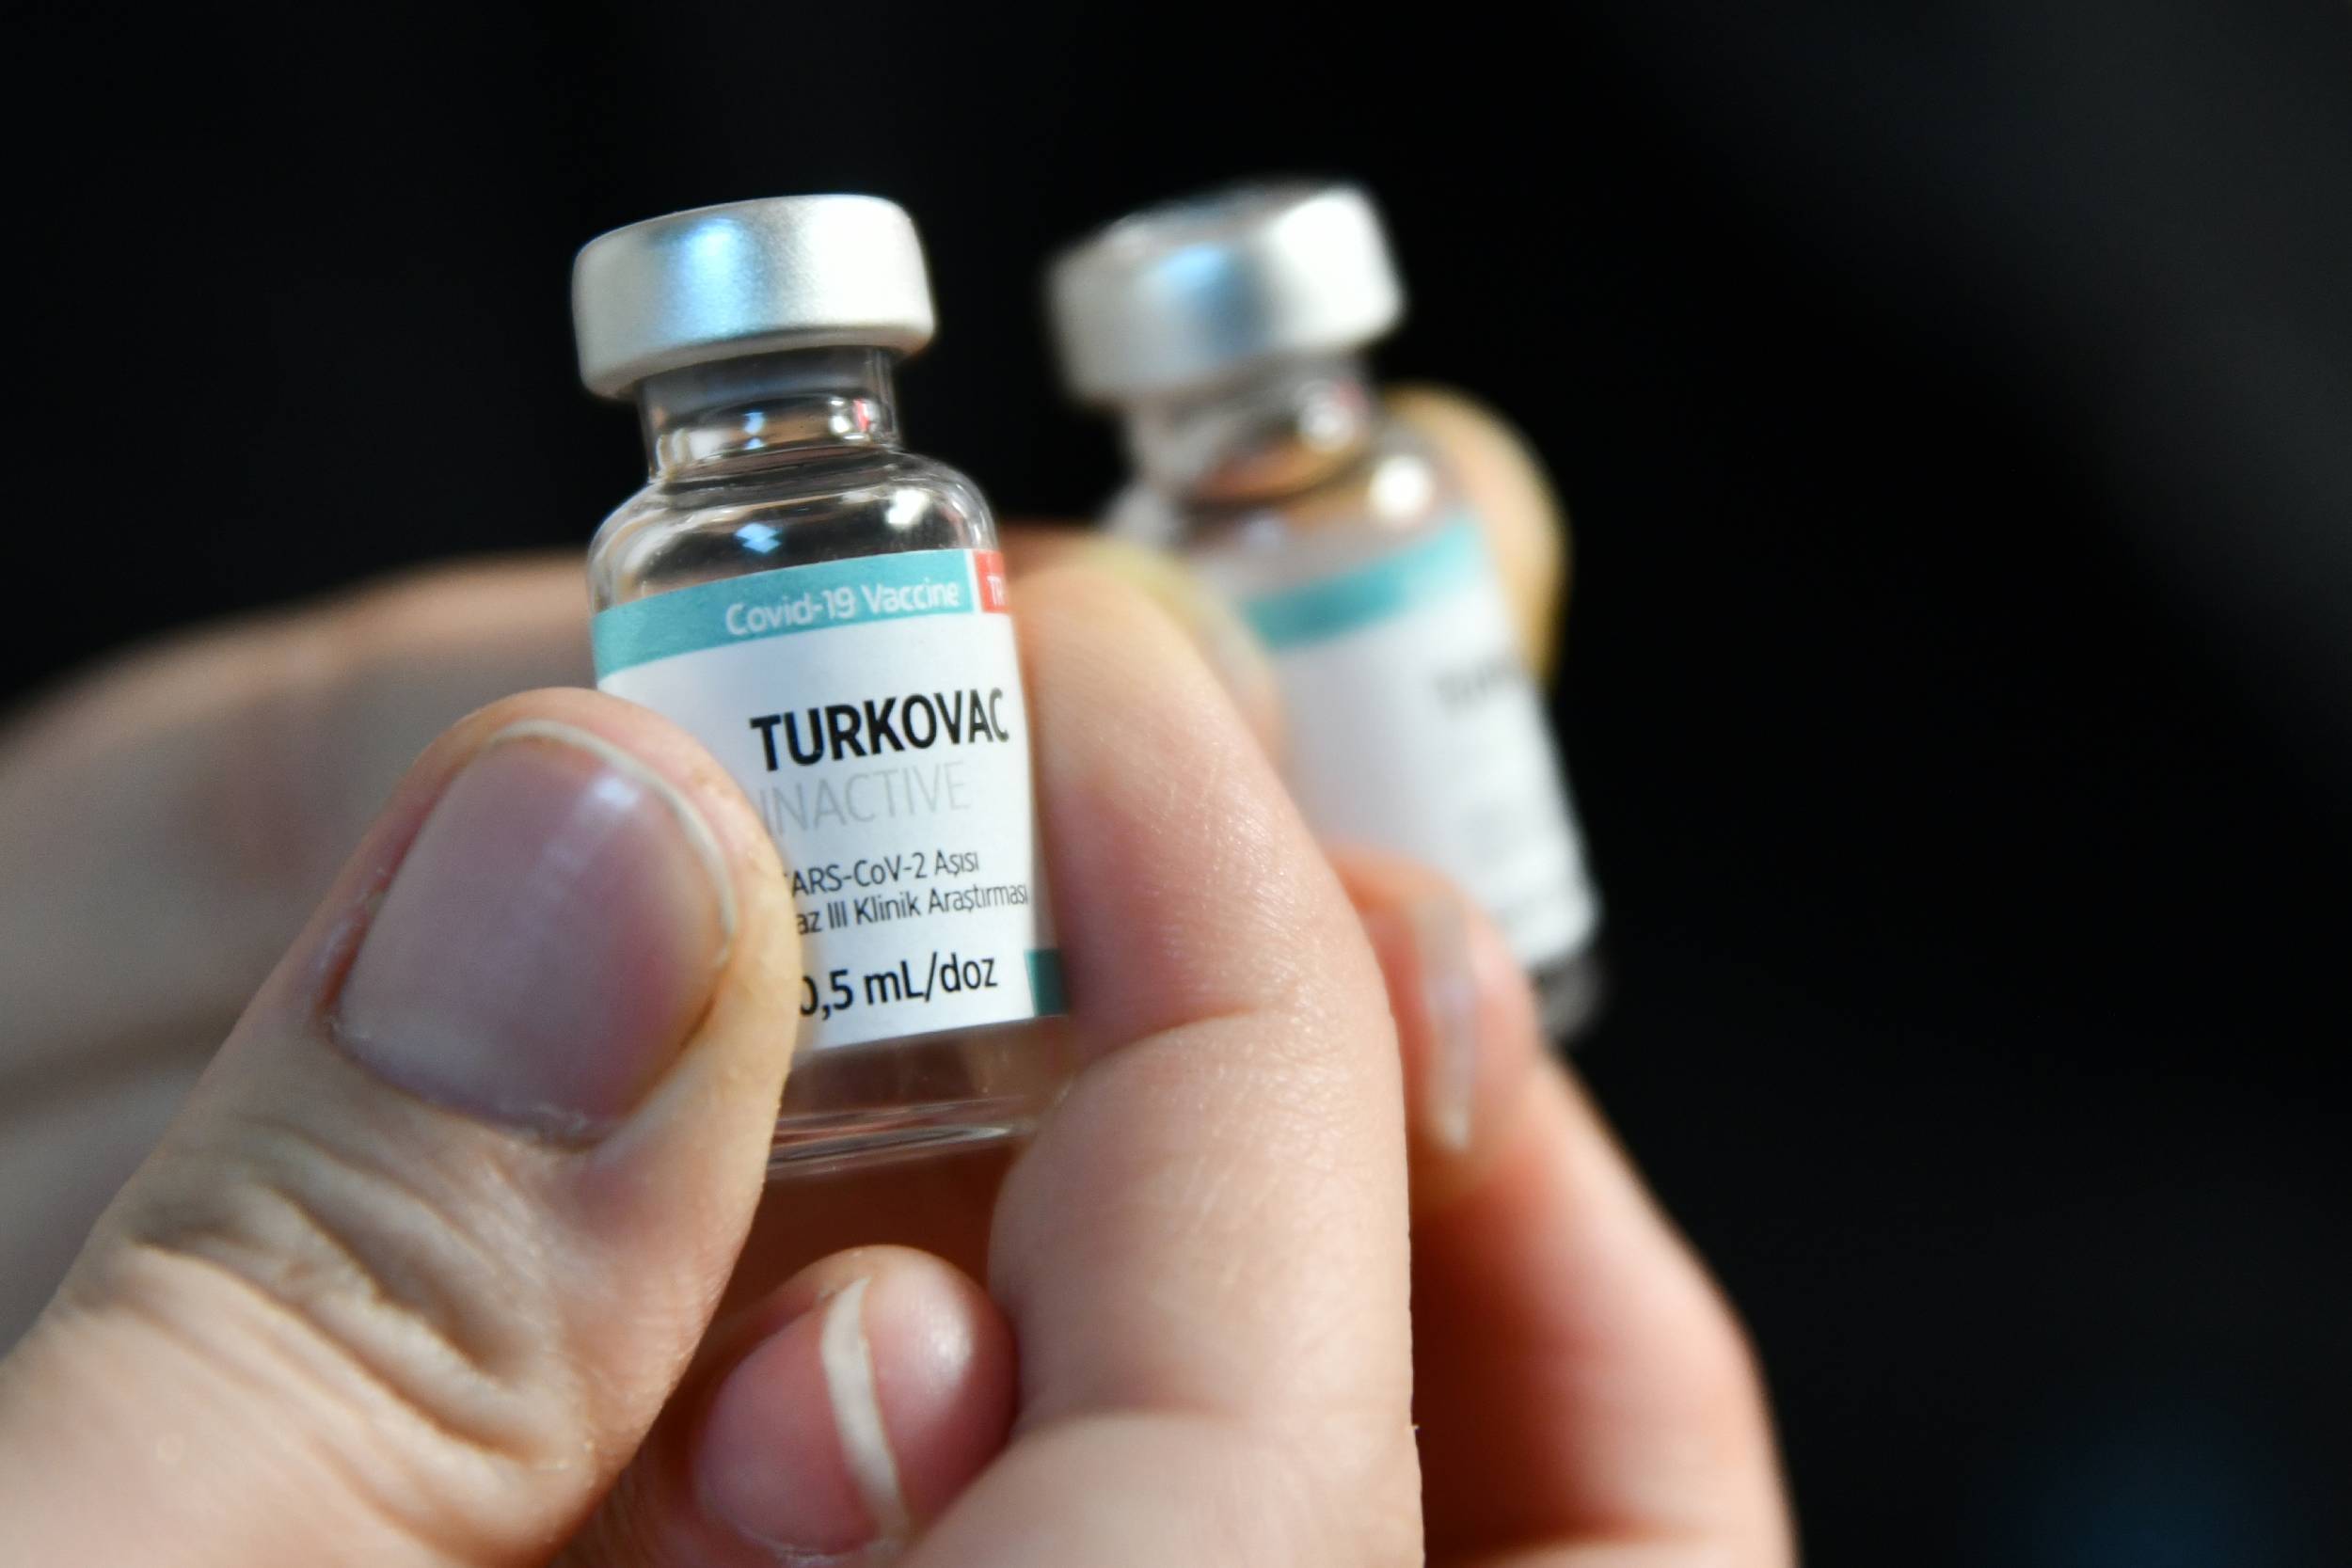 Turkish COVID-19 vaccine shows promising results